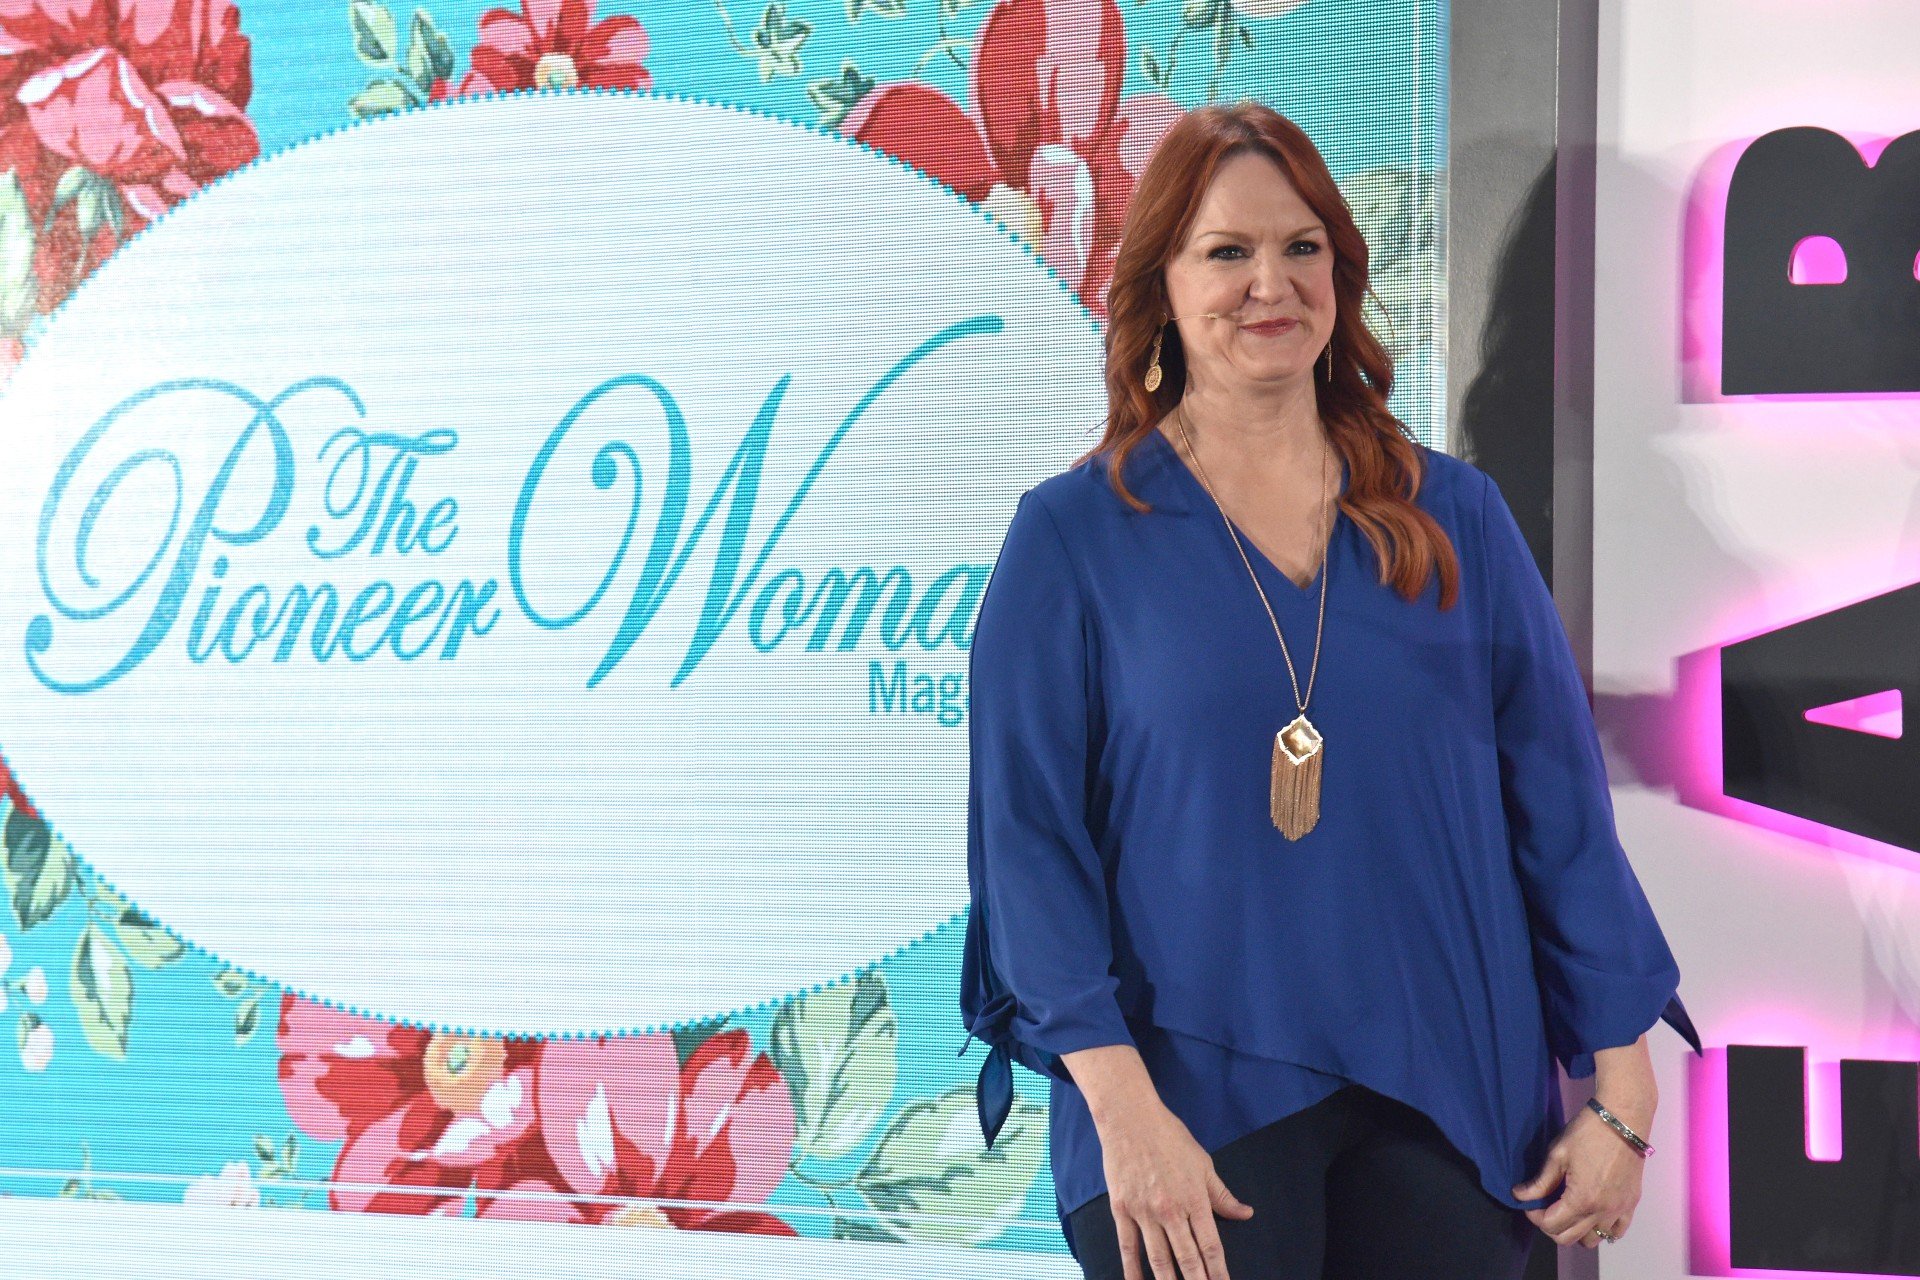 The Pioneer Woman Ree Drummond at a Pioneer Woman event.